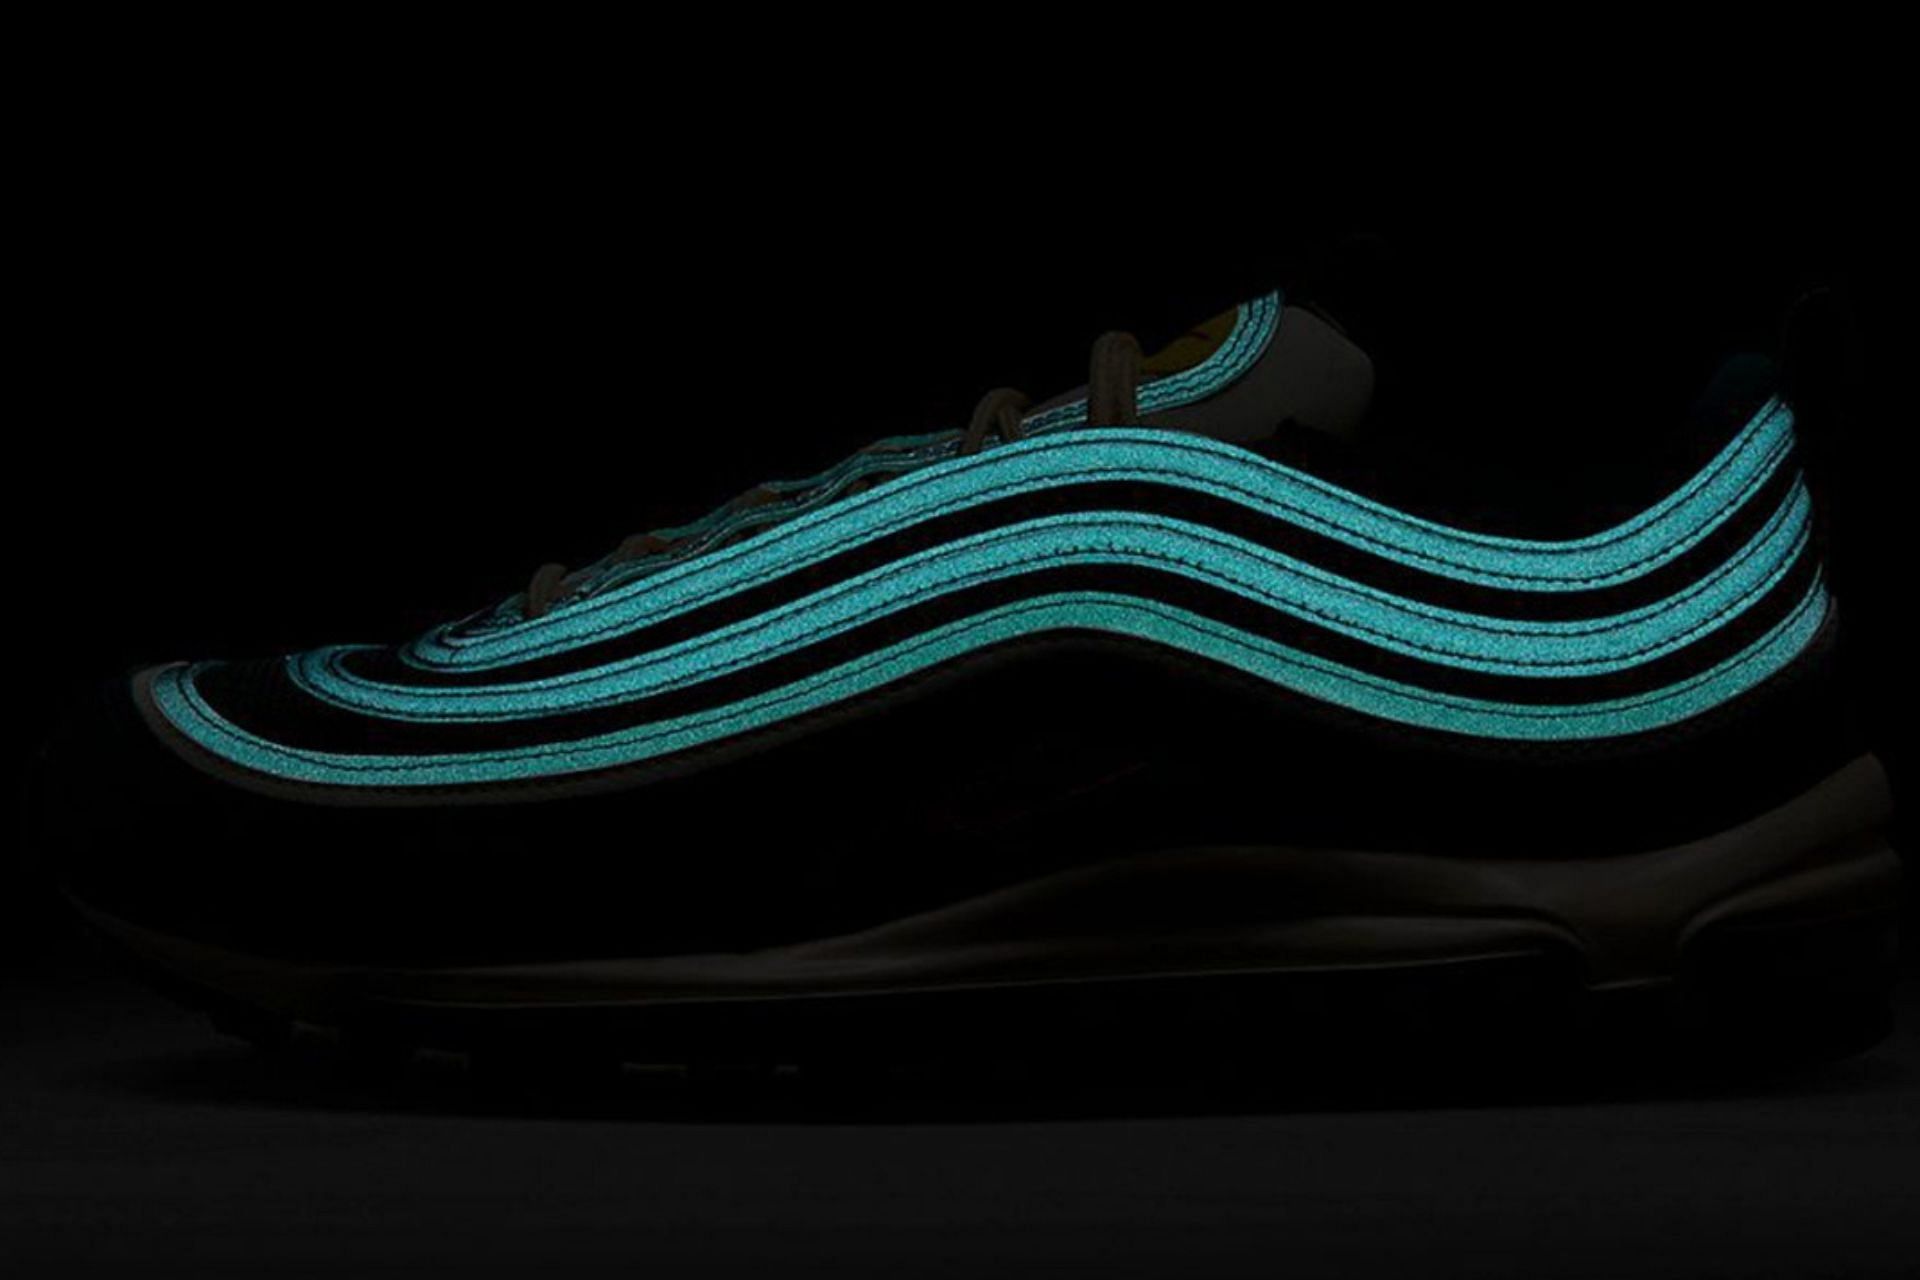 Take a look at the glow-in-the-dark feature of the shoe that makes it more appealing (Image via Nike)